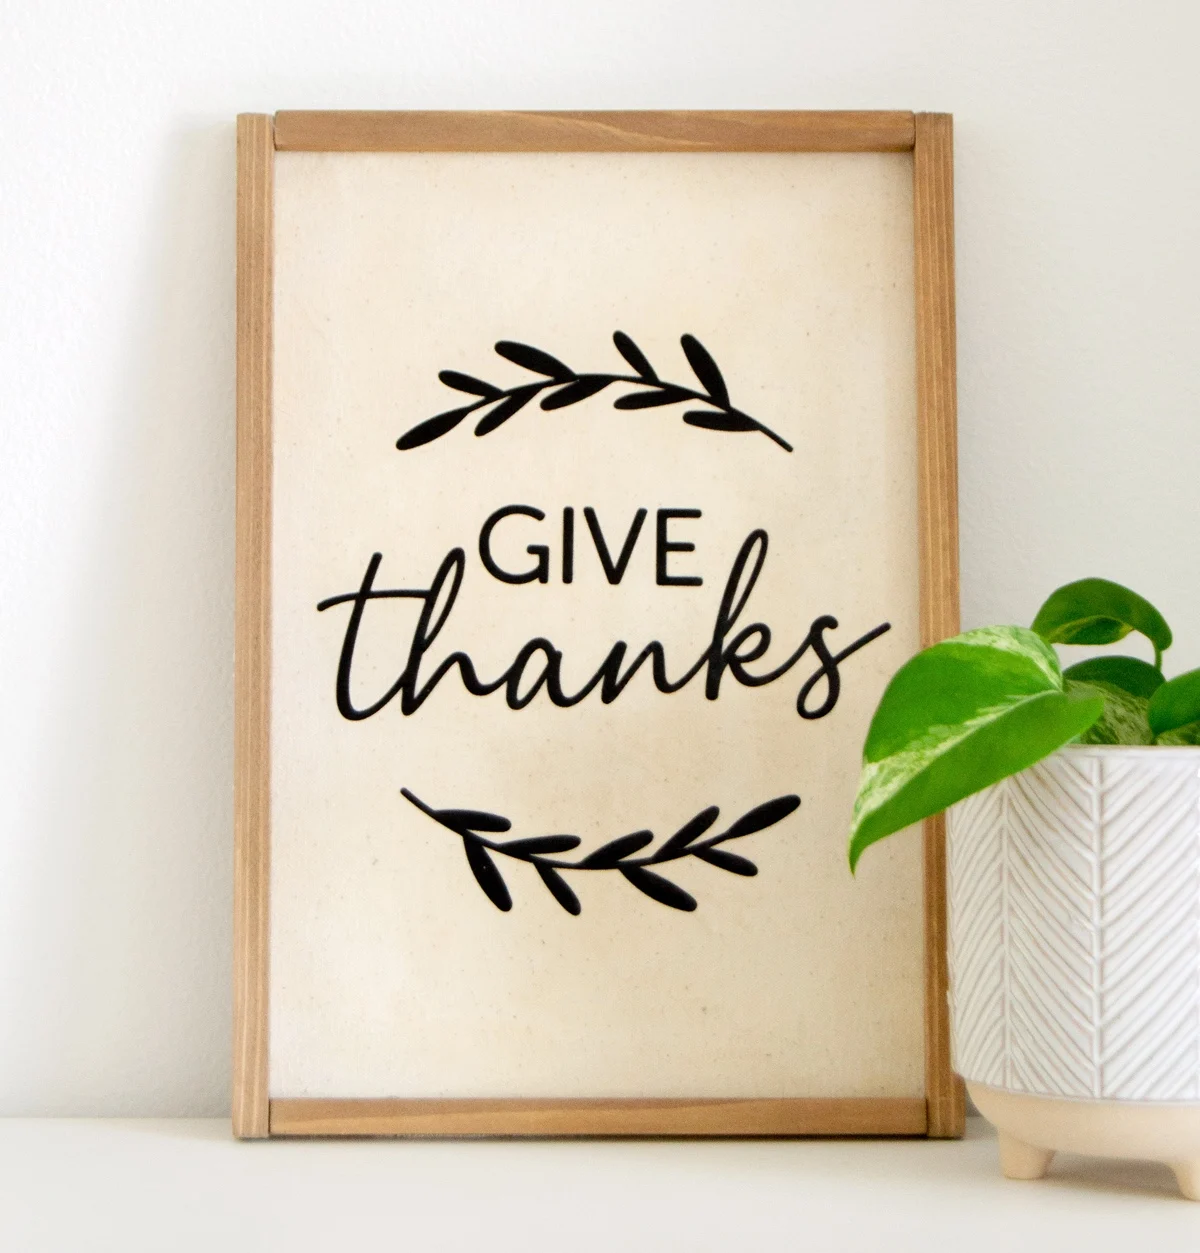 Make a simple Thanksgiving sign